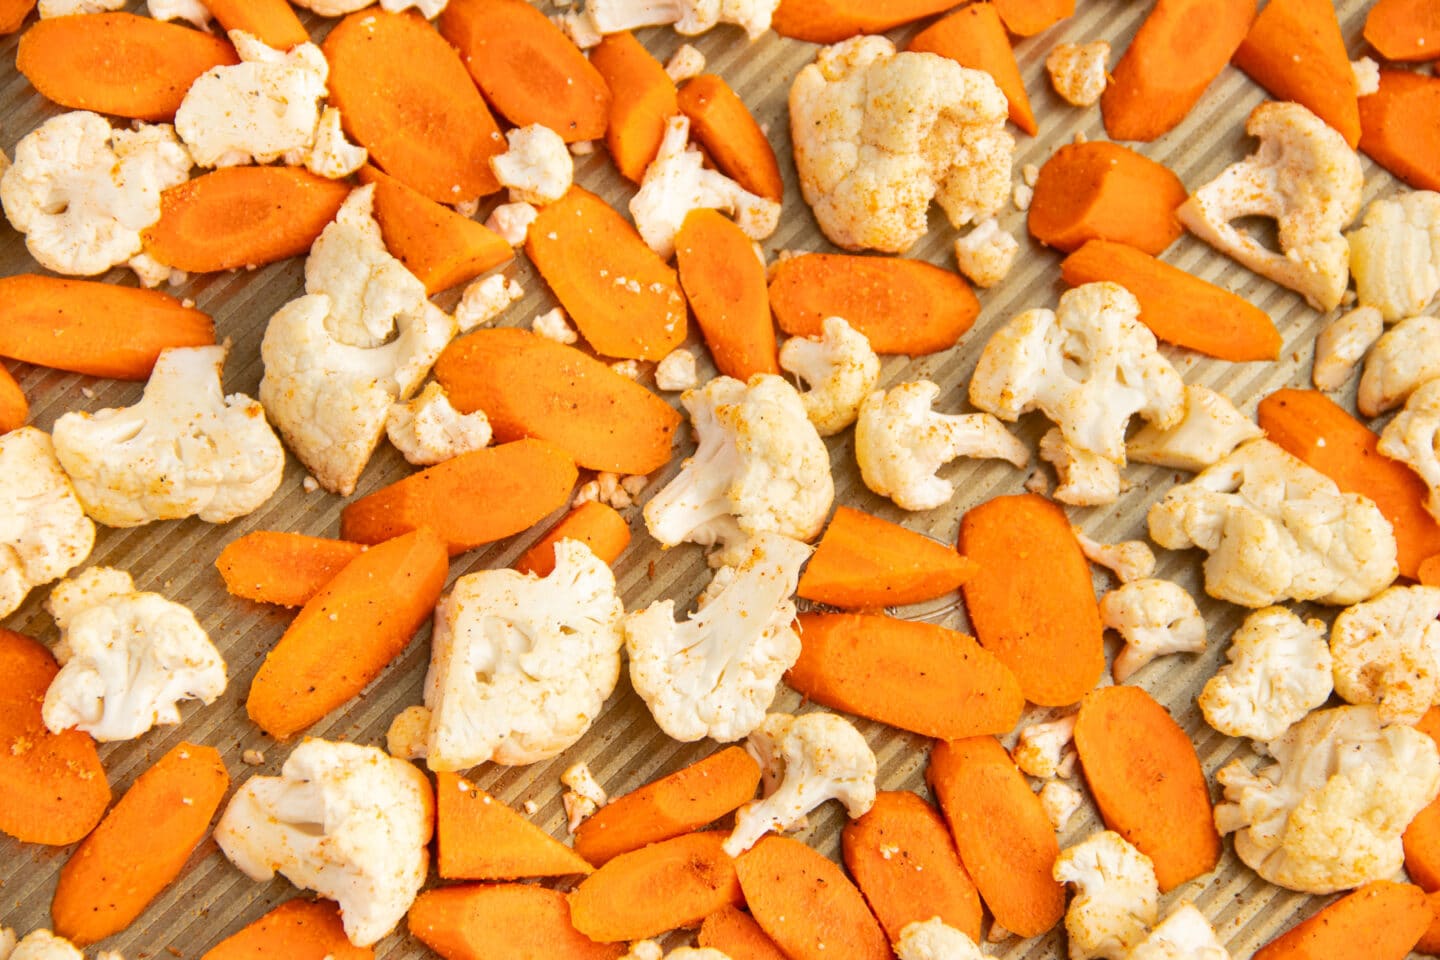 This is a picture of a baking tray with seasoned carrots and cauliflower.